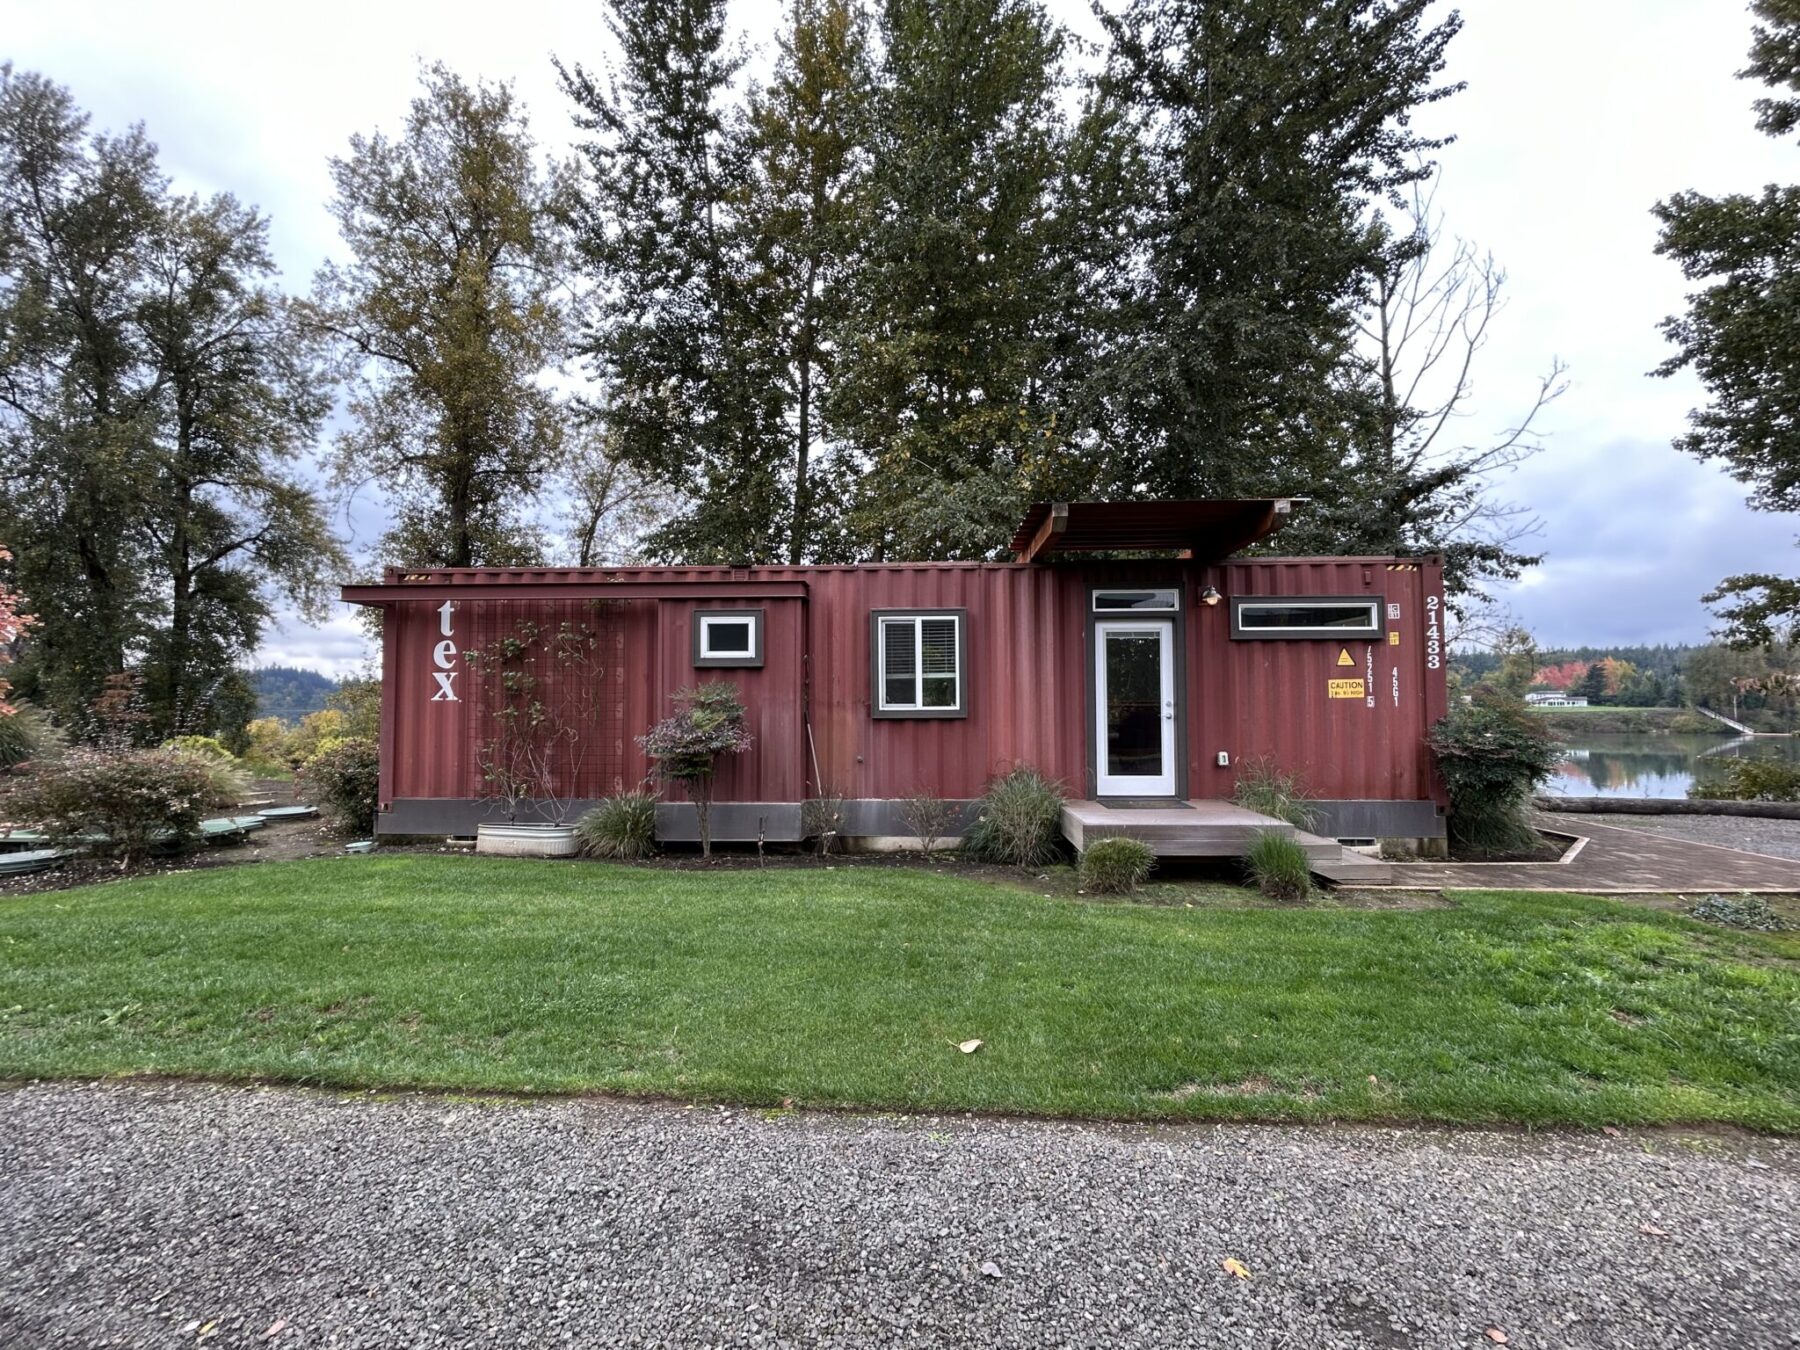 Container home or ADU builder Washington